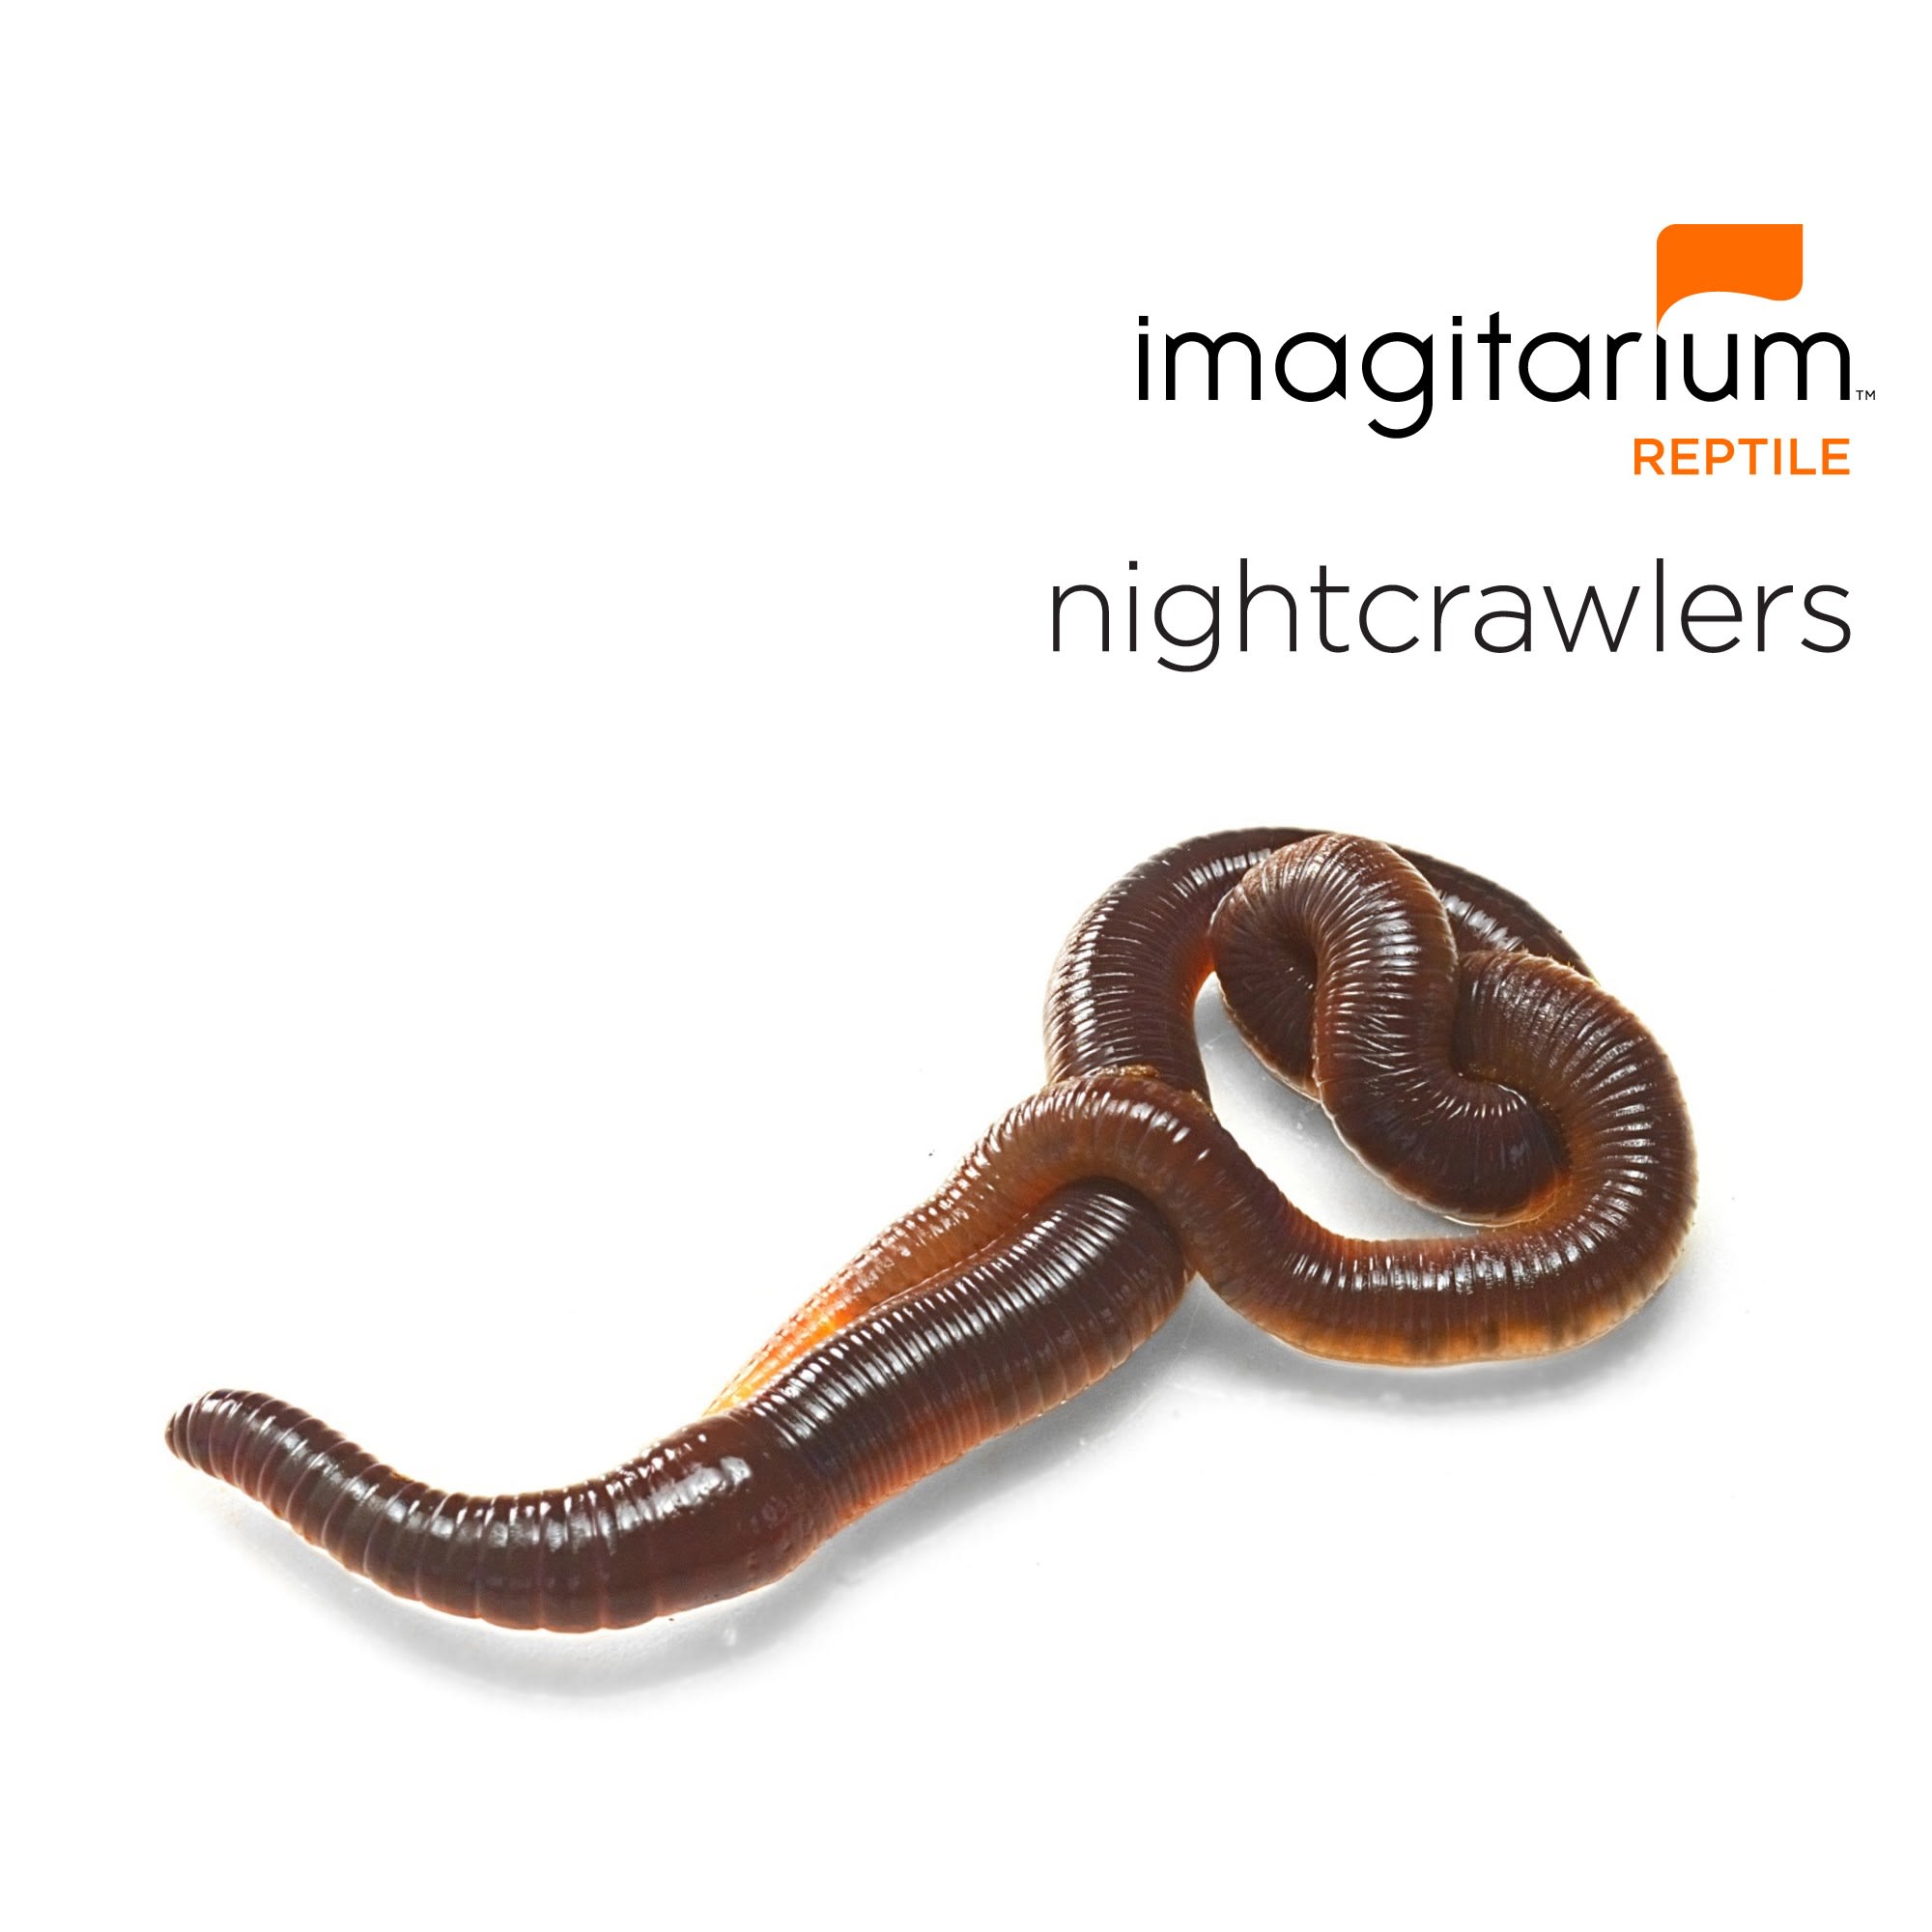 The art of finding and capturing nightcrawlers